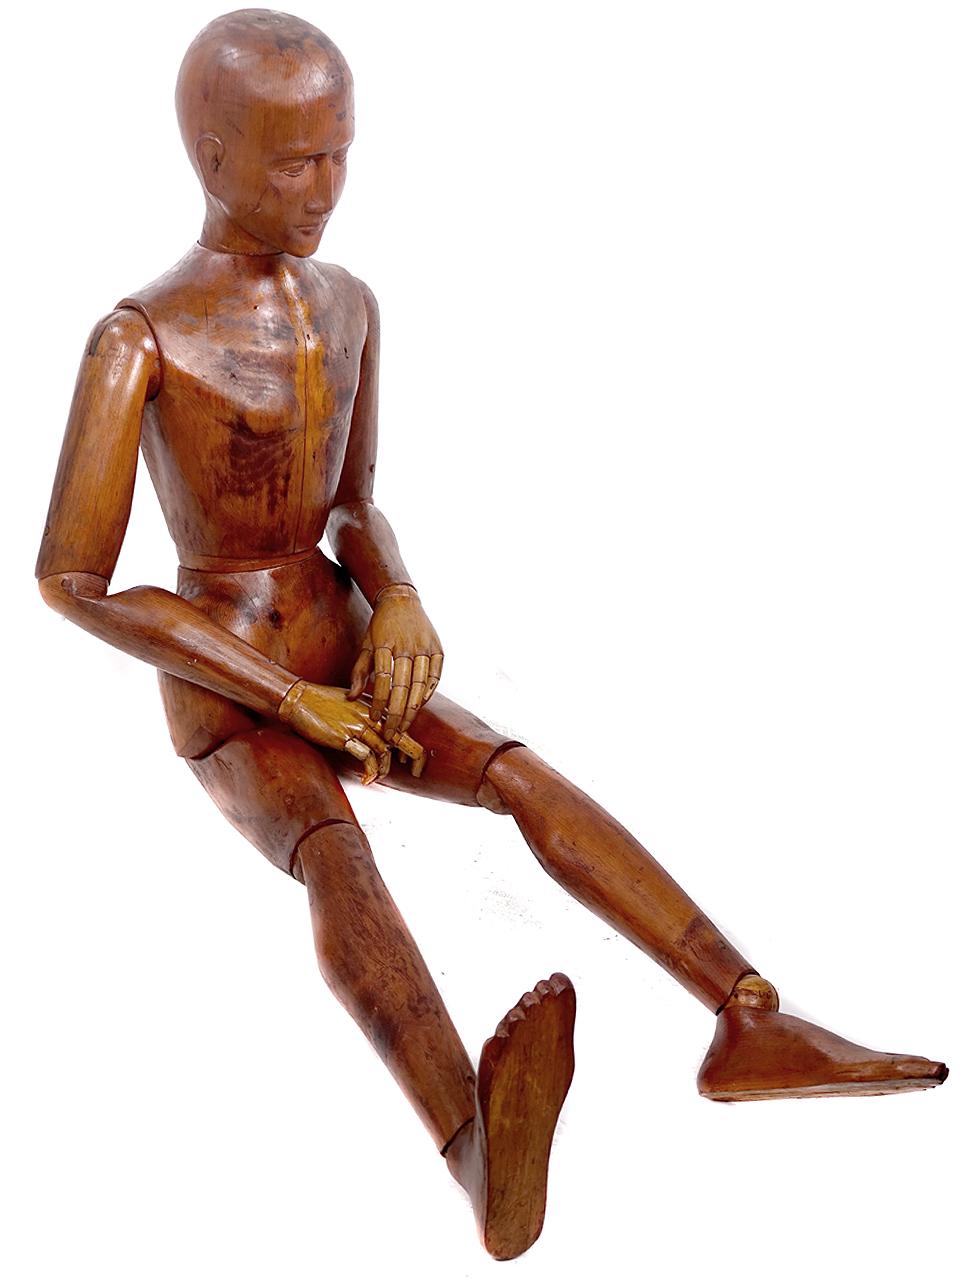 This is a nice realistically carved lay figure from the late 19th century. All the fingers and joints are articulated. The feet are carved as a single unit and beautifully done. It is becoming almost impossible to find figures of this size. At 64